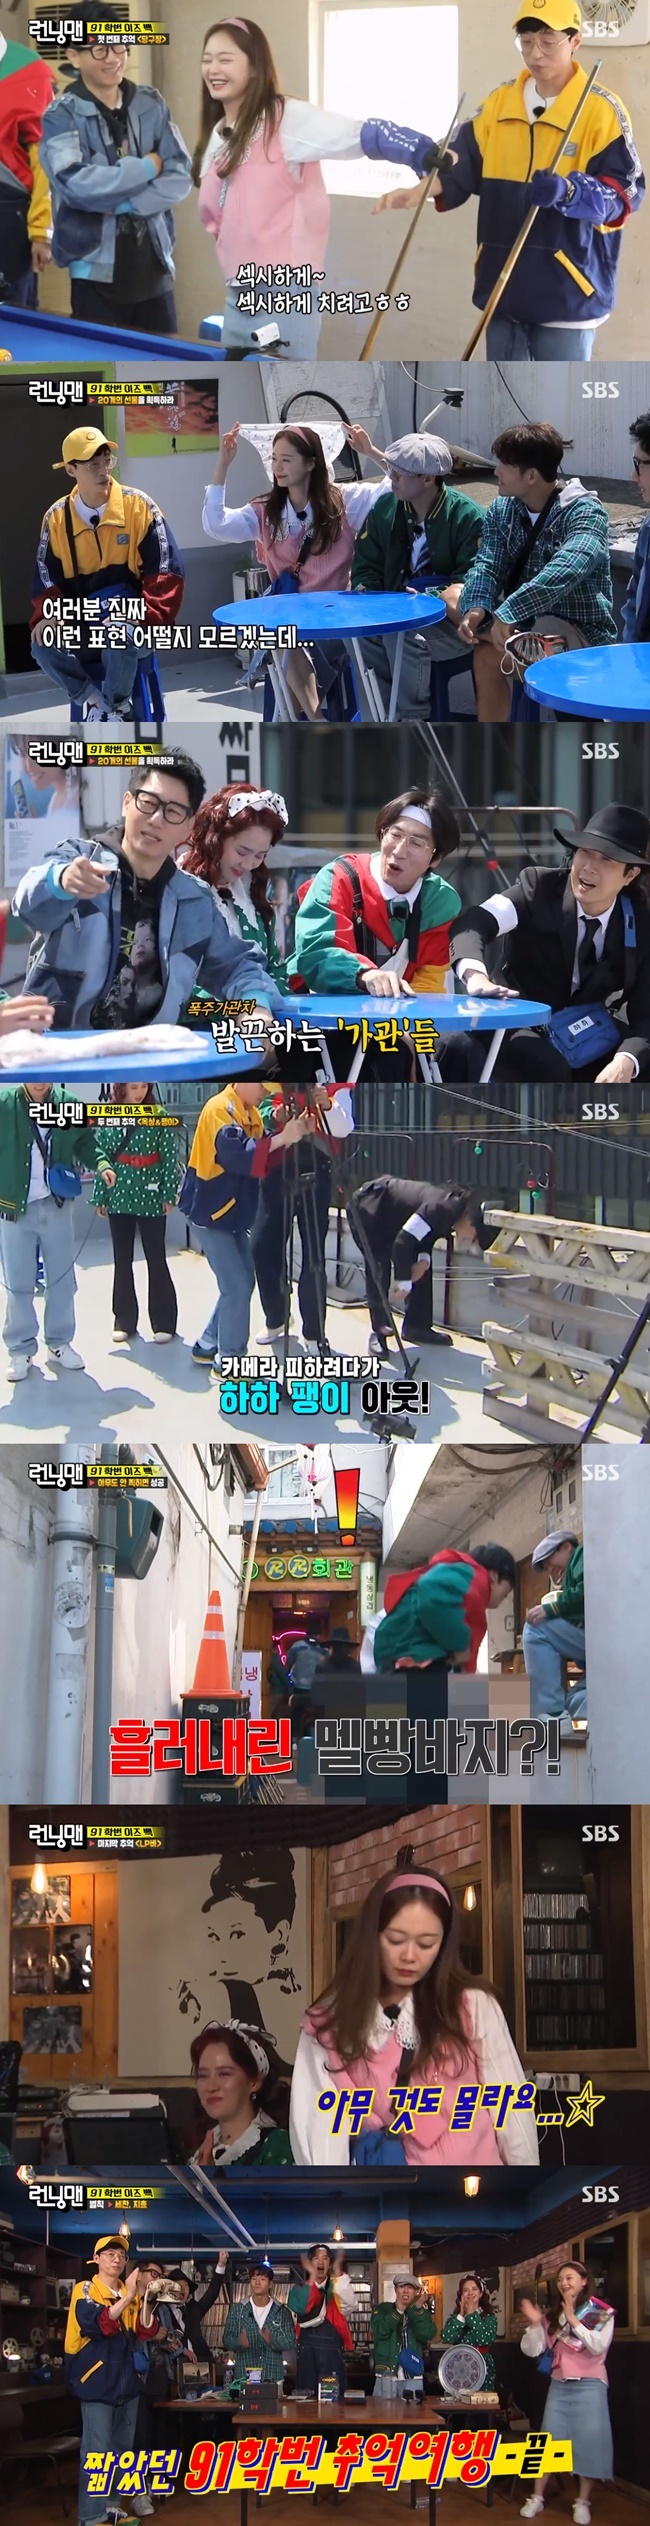 Yoo Jae-Suk was appalled by the rustic visuals of the members.On May 2, SBS Running Man, the 91th Orange Is the New Black Race 2 of the members who transformed into 91st grade was held.The first mission was a memorable billiard room, where two winners from a four-ball match with a pocketball take the goods.Jeon So-min did not care about the members boos, but challenged sexy billiards and appealed to the charm.Eventually Yang Se-chan was furious, saying, There is no guest, but hit it quickly.Winners -- Losers Haha has an LP player, Song Ji-hyo has a sheep-cooked table Choices.The second mission was a cafe with a feeling of sensitivity in the 90s.Yoo Jae-Suk laughed at the visuals of the members who were seated in the seat, saying, I do not know what to say, but it is Savoie.I love this feeling, said Jeon So-min, who genuinely enjoyed the retro, with a row-tightening mission unfolding in the cafe.Yang Se-chan showed off a geeky-mystery show that turns tops on the palms of her hand.Haha was knocked out by Camera while turning top and the Winners & Losers were Yoo Jae-Suk, Jeon So-min, Ji Suk-jin, Yang Se-chan Kim Jong-kook.The third mission was a frozen pork belly house: if you press the Camera timer and hide within three seconds before the picture is taken, the mission success.The total number of opportunities is eight, and each failure reduces the gift one by one.The suspender spilled out of the underwear as Lee Kwang-soo climbed up the wall to hide himself.In the leftover photo, Lee Kwang-soo, who took off his pants, remained and caused laughs.The continued failures increased the timer from three seconds to five seconds, although members of the Running Man who had a great chance, the shoes of Yoo Jae-Suk caught the angle and blew the opportunity.Eventually, the members Choices the way they turn on the timer and hide behind the store door, and Ji Suk-jin, Yoo Jae-Suk and Jeon So-min won the product.The last mission was the LP bar, where you can submit your stories and application songs and get additional products if you are adopted by LP Bar President.Kim Jong-kook asked Ji Suk-jin, Can I remember such a different woman? So Ji Suk-jin said, Wife? Whats the past?I fell into college and his friend was stuck and broke up, but No, I will write another love story. The boss Choices was Kim Jong-kooks application song, The Year is Going. The members sang songs with each others hands tightly held.So, Jeon So-min poured tears and said, The song is so sad.However, Haha laughed at Song Ji-hyo and Jeon So-min, saying, Can I take a picture?